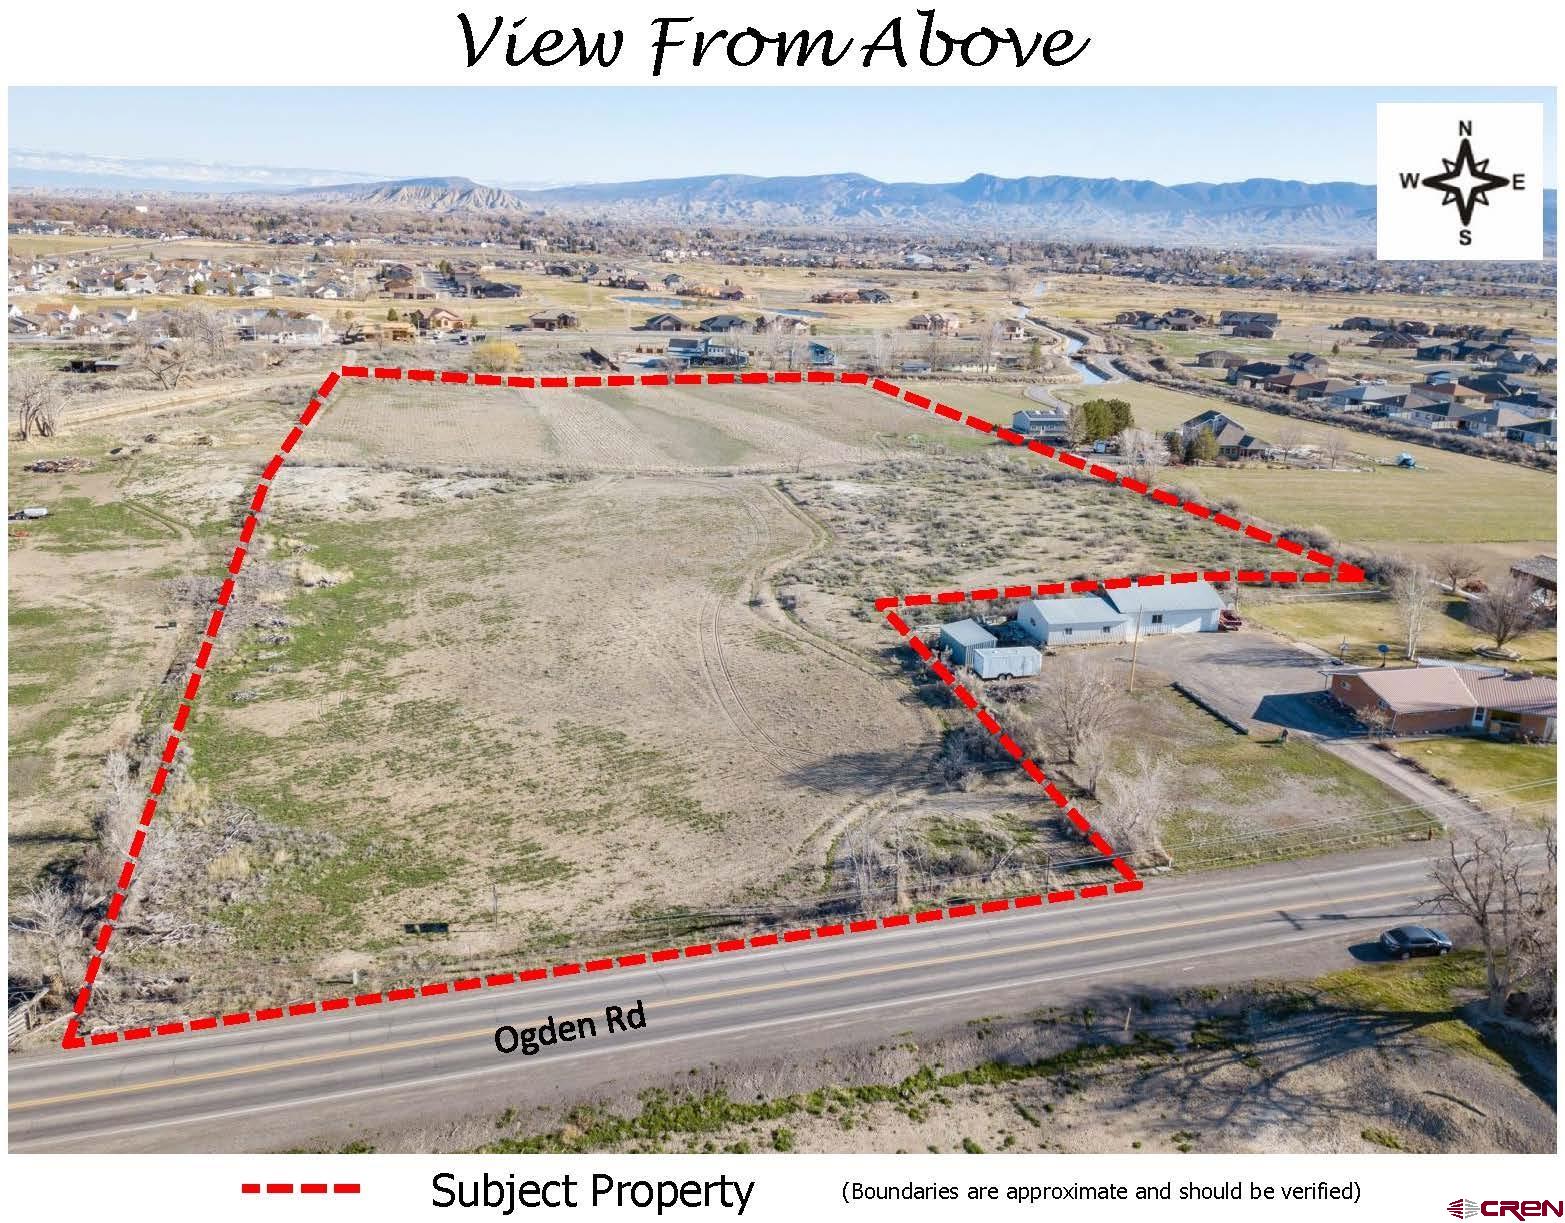 EXCELLENT DEVELOPMENT POTENTIAL!   Take Advantage of This Ready-To-Develop Residential Land.   10.802-acre (MOL) parcel zoned R-2 “Low Density District” in the City of Montrose. R-2 zoning is intended for single family homes. 7.7 shares UVWUA irrigation water. Property is located on an established road, near the Bridges Golf Community. Strategically located less than .5 miles from South Townsend Avenue and the booming southern commercial corridor with major franchise shopping and dining establishments.